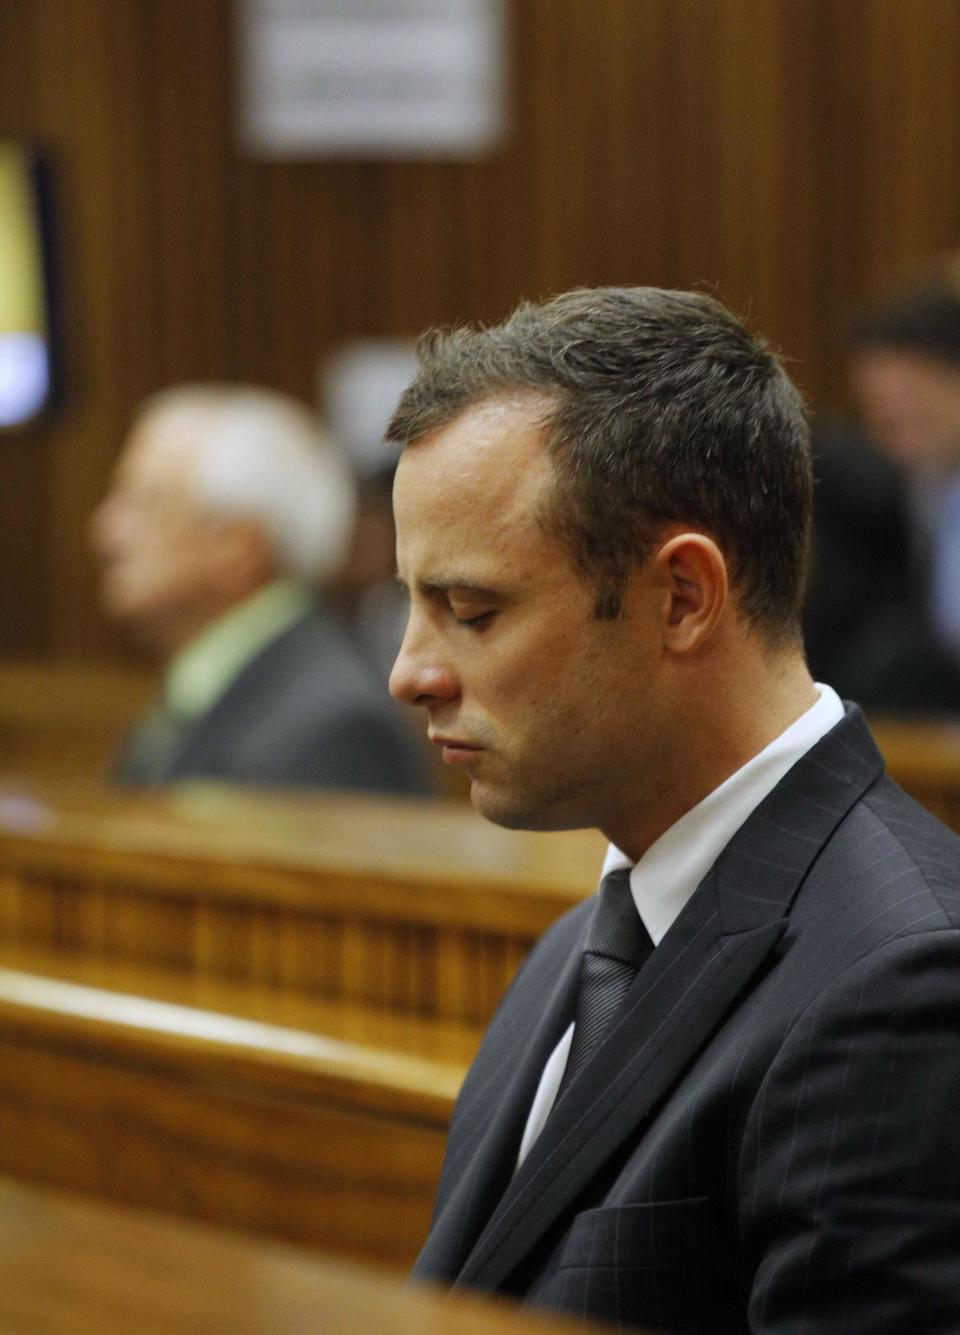 Olympic and Paralympic track star Oscar Pistorius sits in the dock at the North Gauteng High Court in Pretoria March 11, 2014. Pistorius is on trial for murdering his girlfriend Reeva Steenkamp at his suburban Pretoria home on Valentine's Day last year. REUTERS/Kim Ludbrook/Pool (SOUTH AFRICA - Tags: SPORT CRIME LAW)